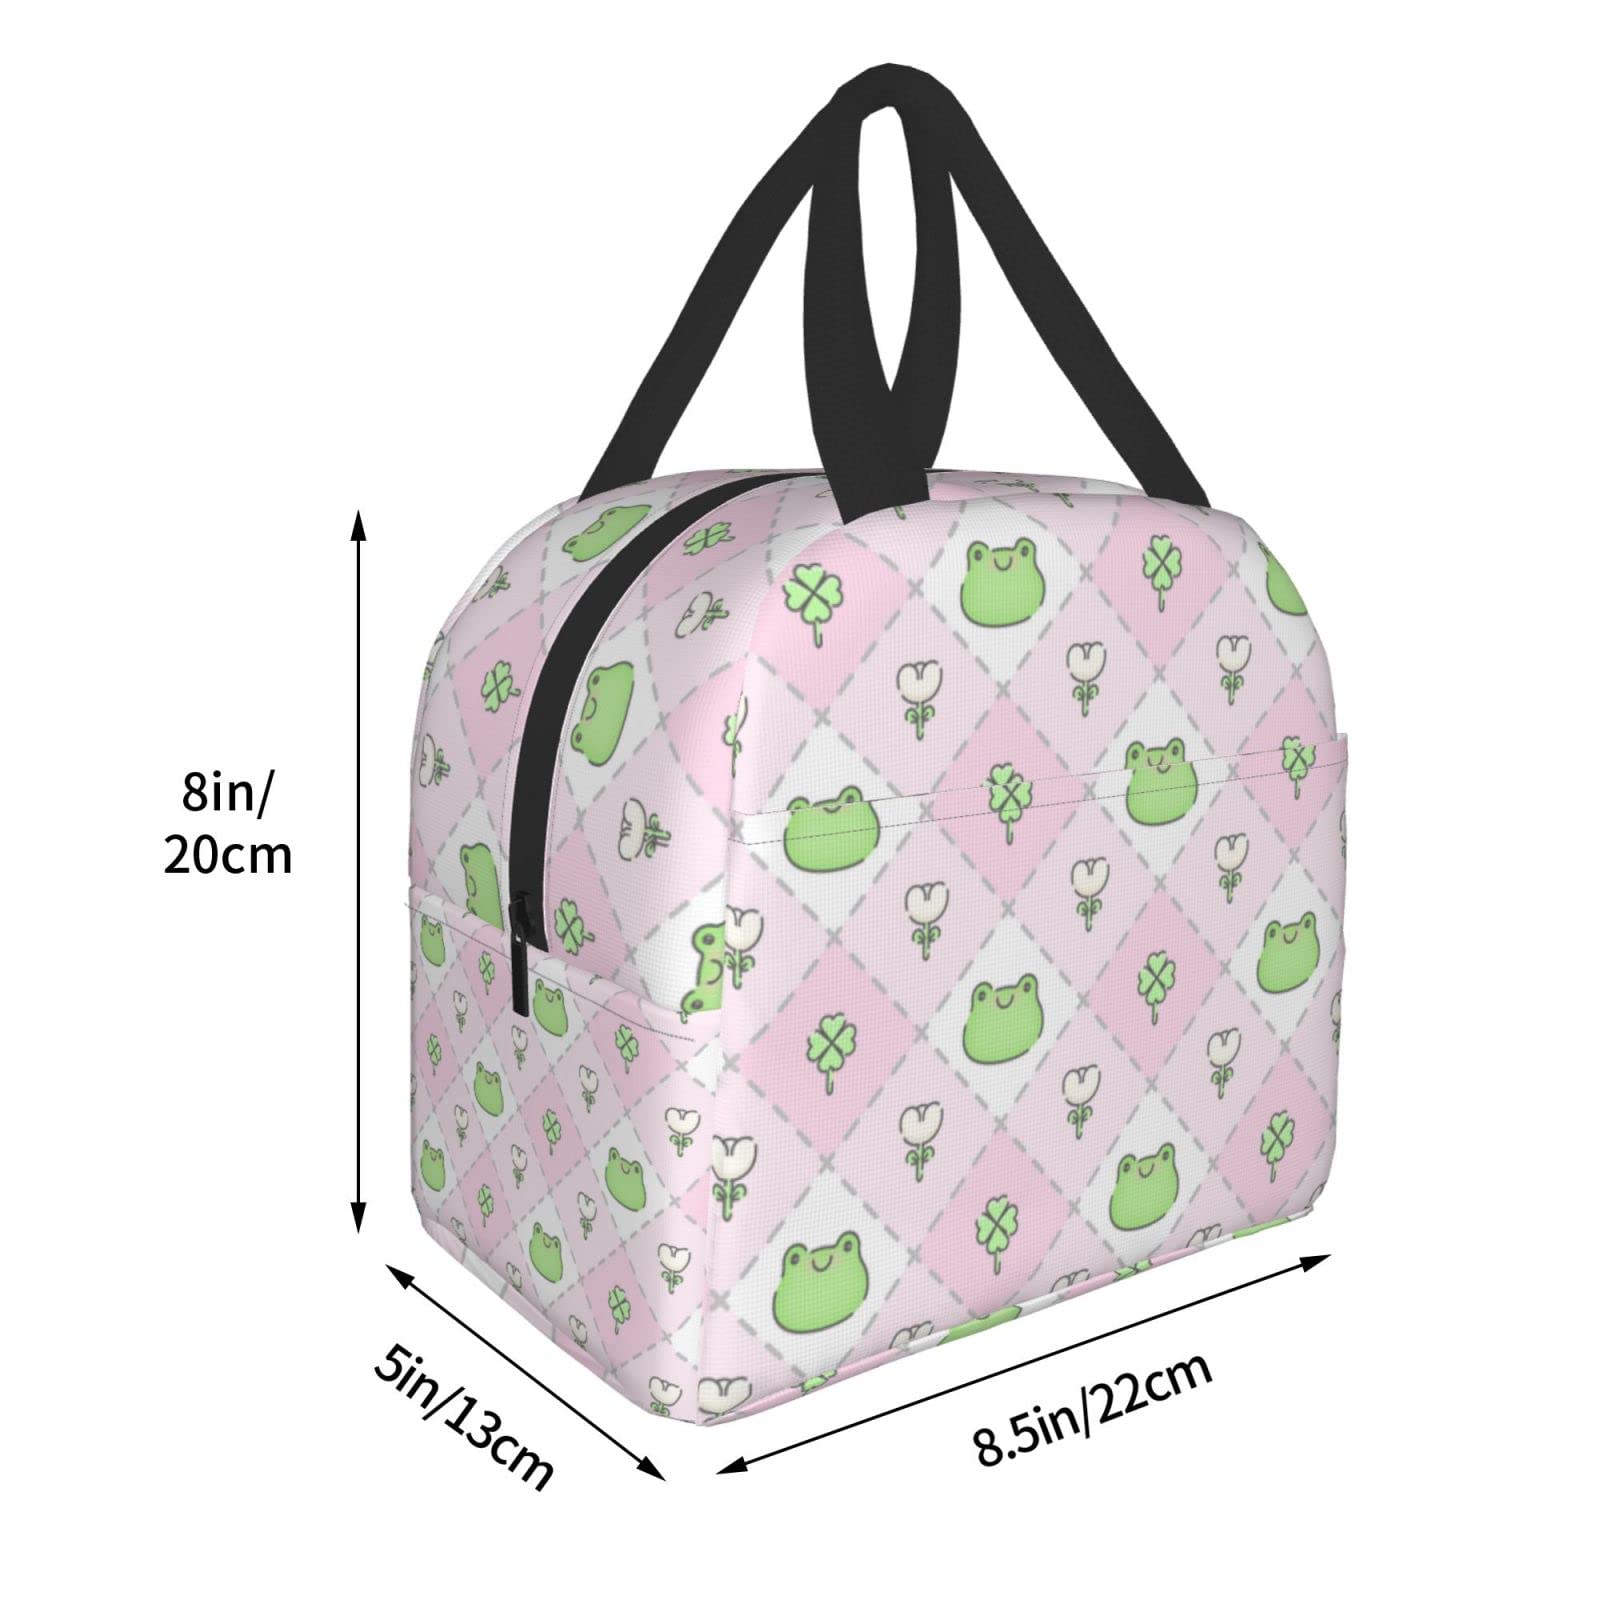 Ucsaxue Green Frog Kawaii Pink Lunch Bag Travel Box Work Bento Cooler Reusable Tote Picnic Boxes Insulated Container Shopping Bags For Adult Women Men